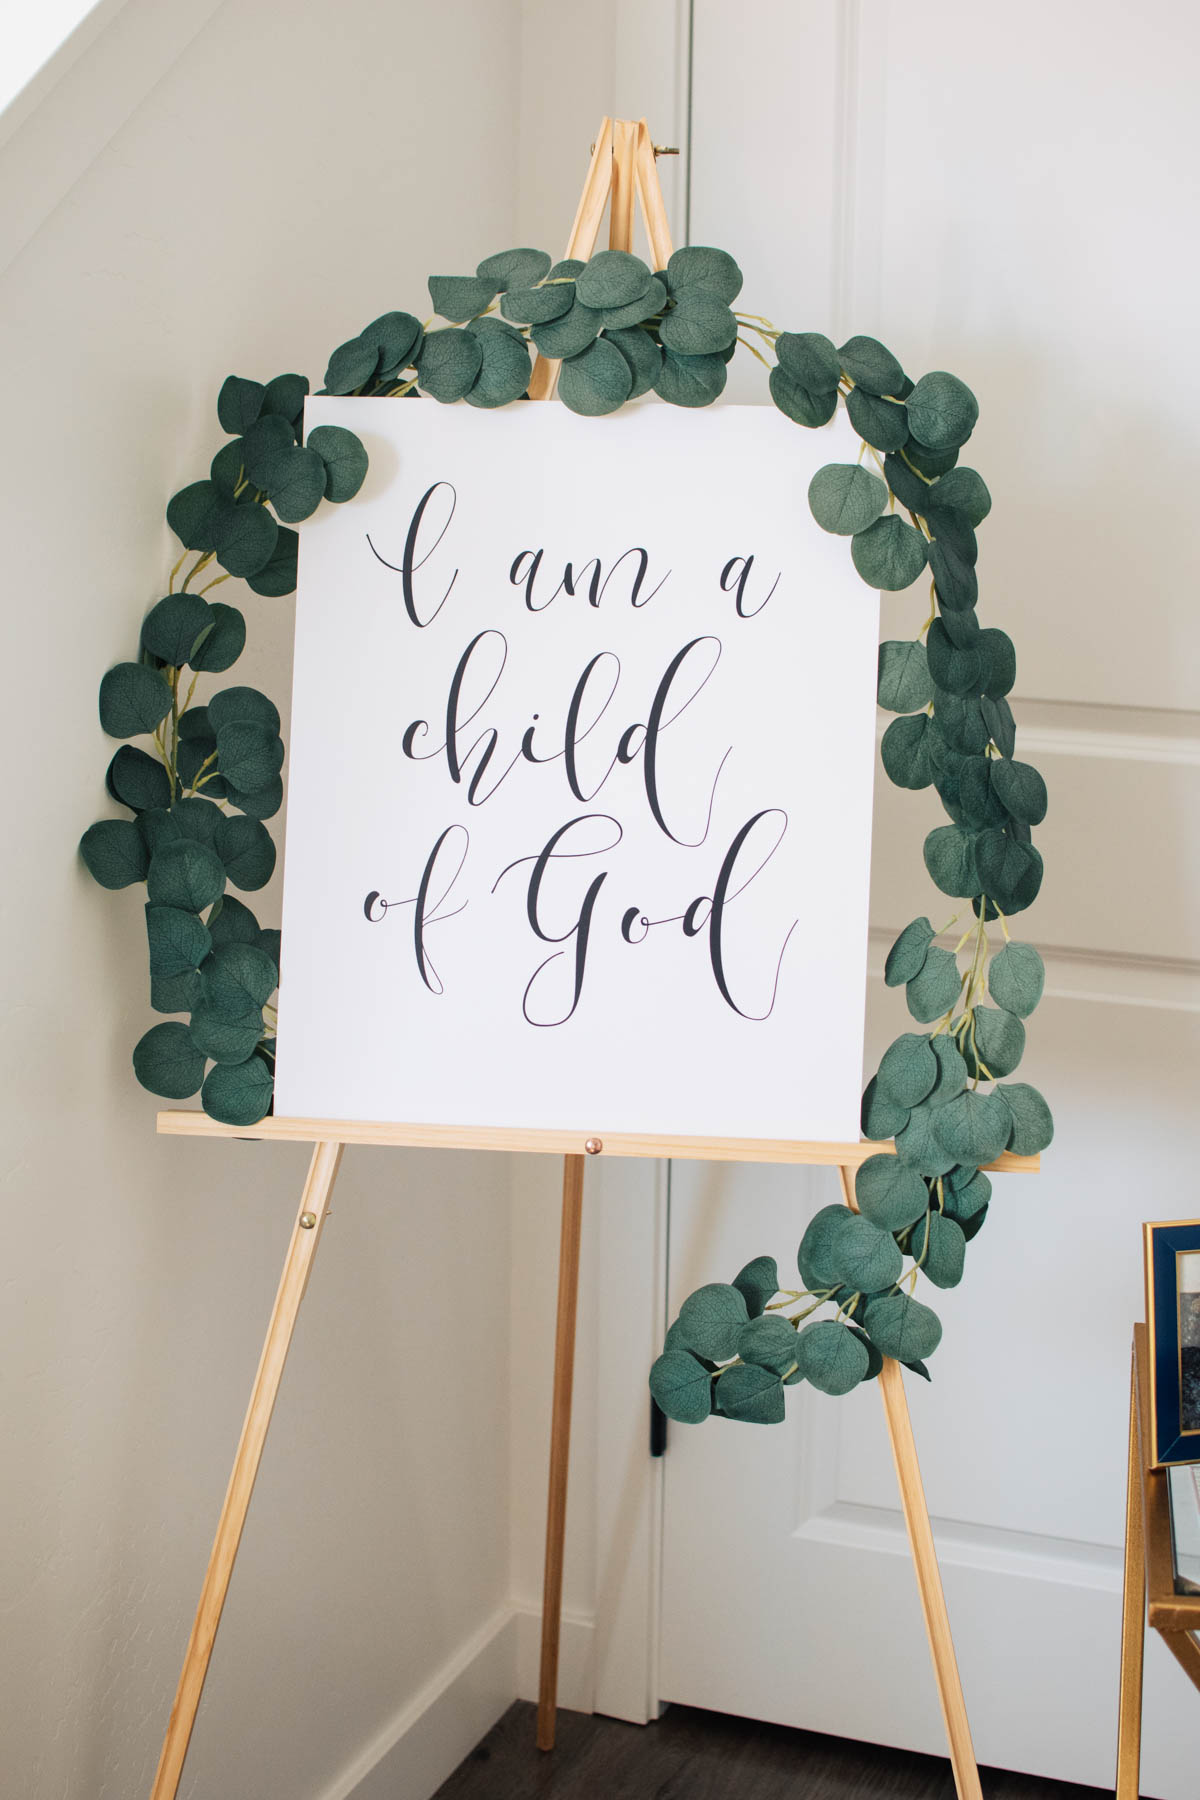 I am a child of God sign on wood easel with eucalyptus garland.